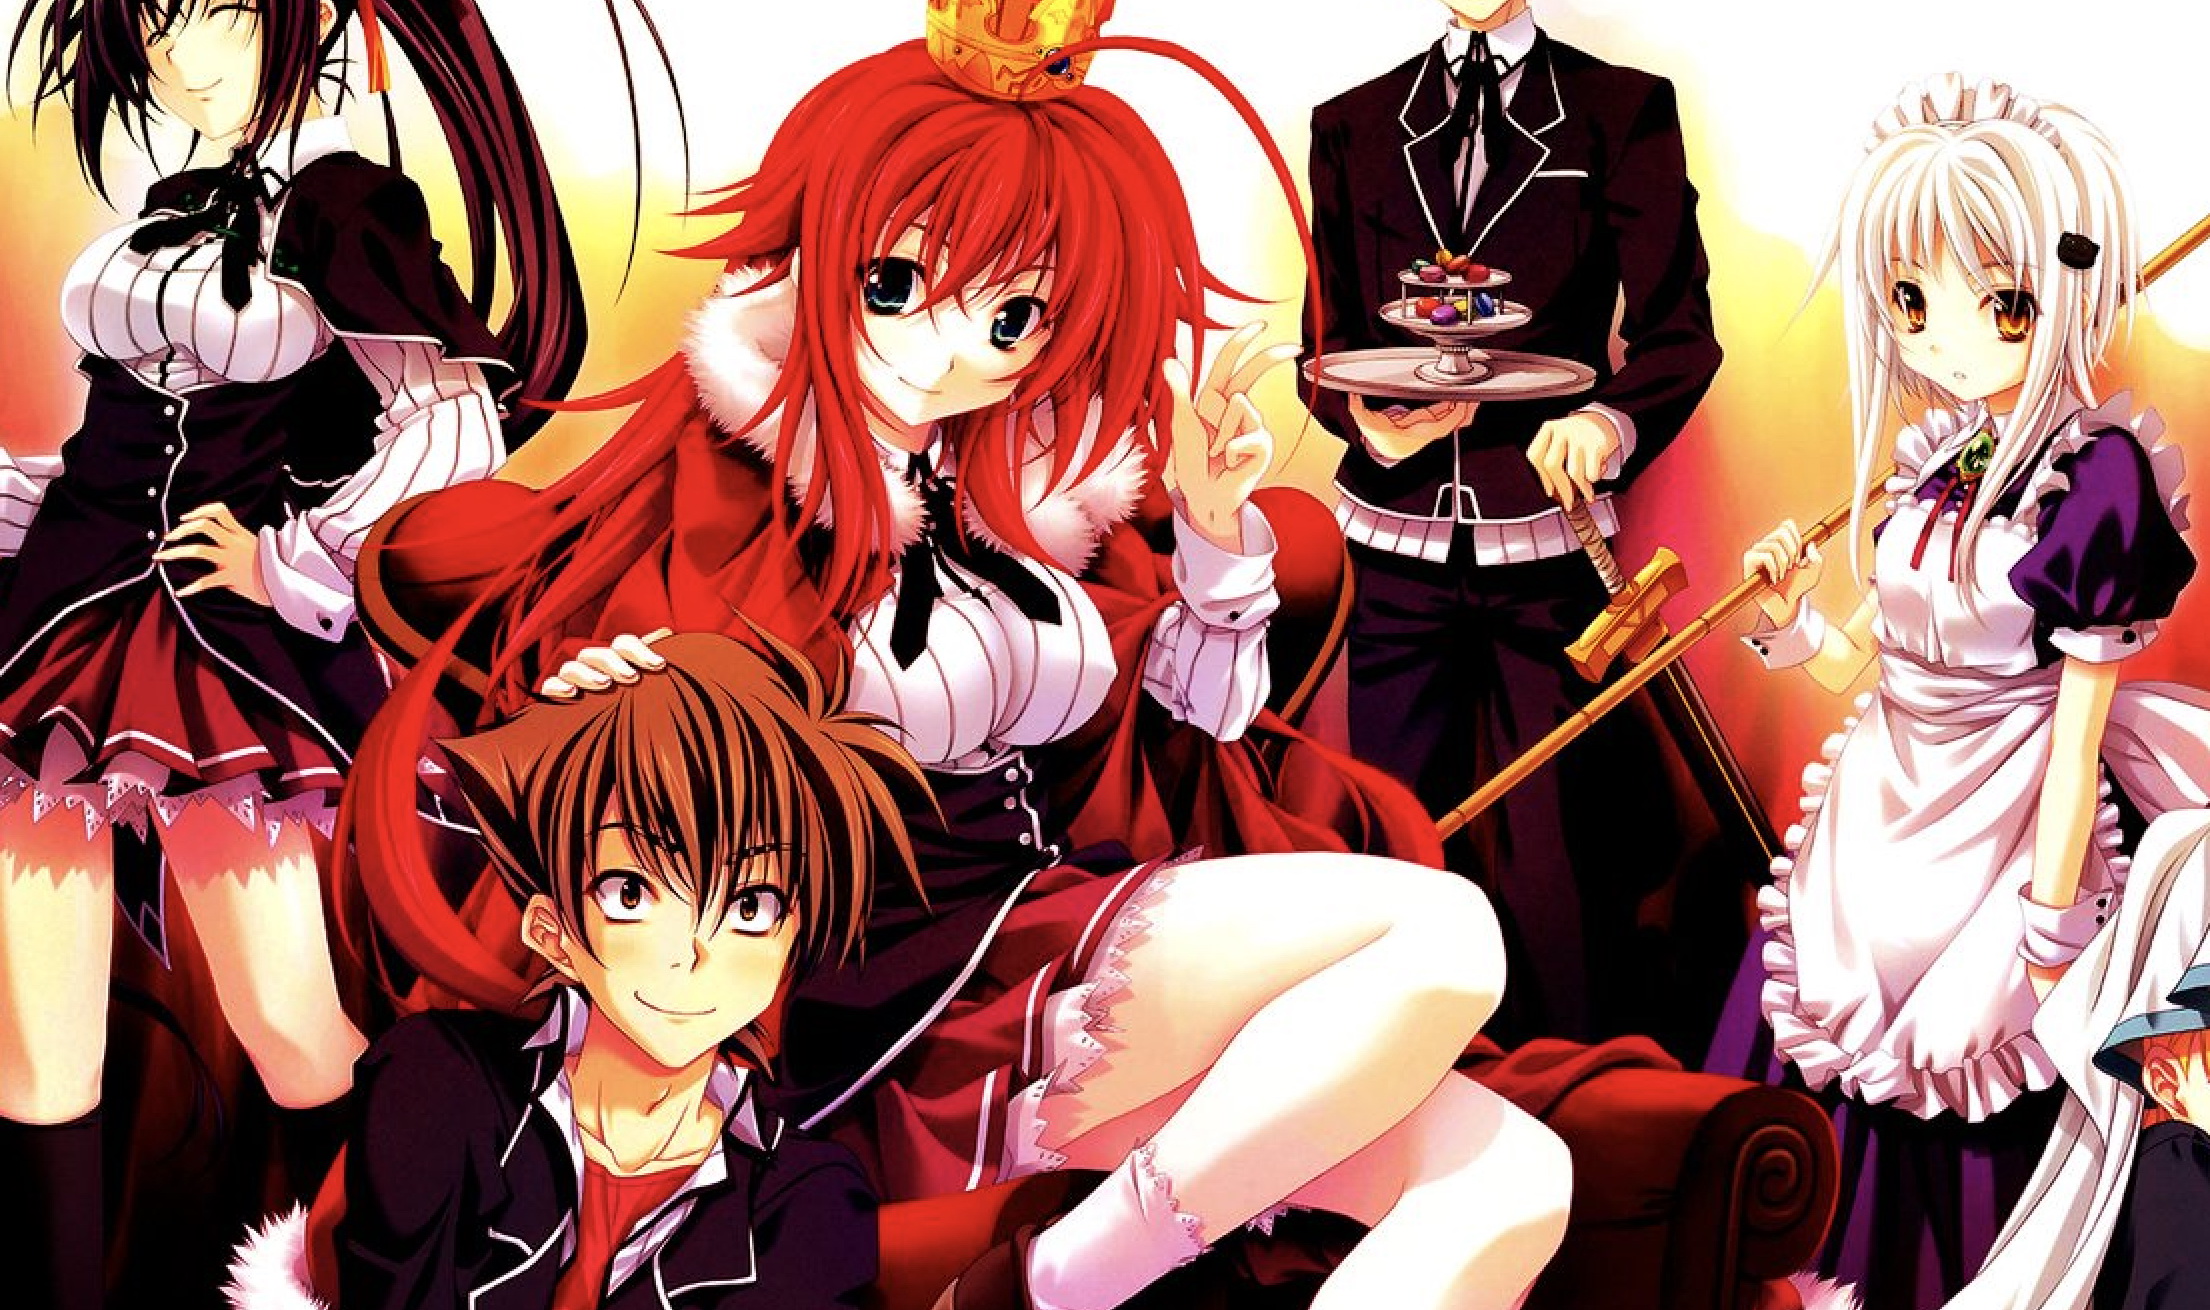 15 BEST Anime Like WORLDS END HAREM Recommendations